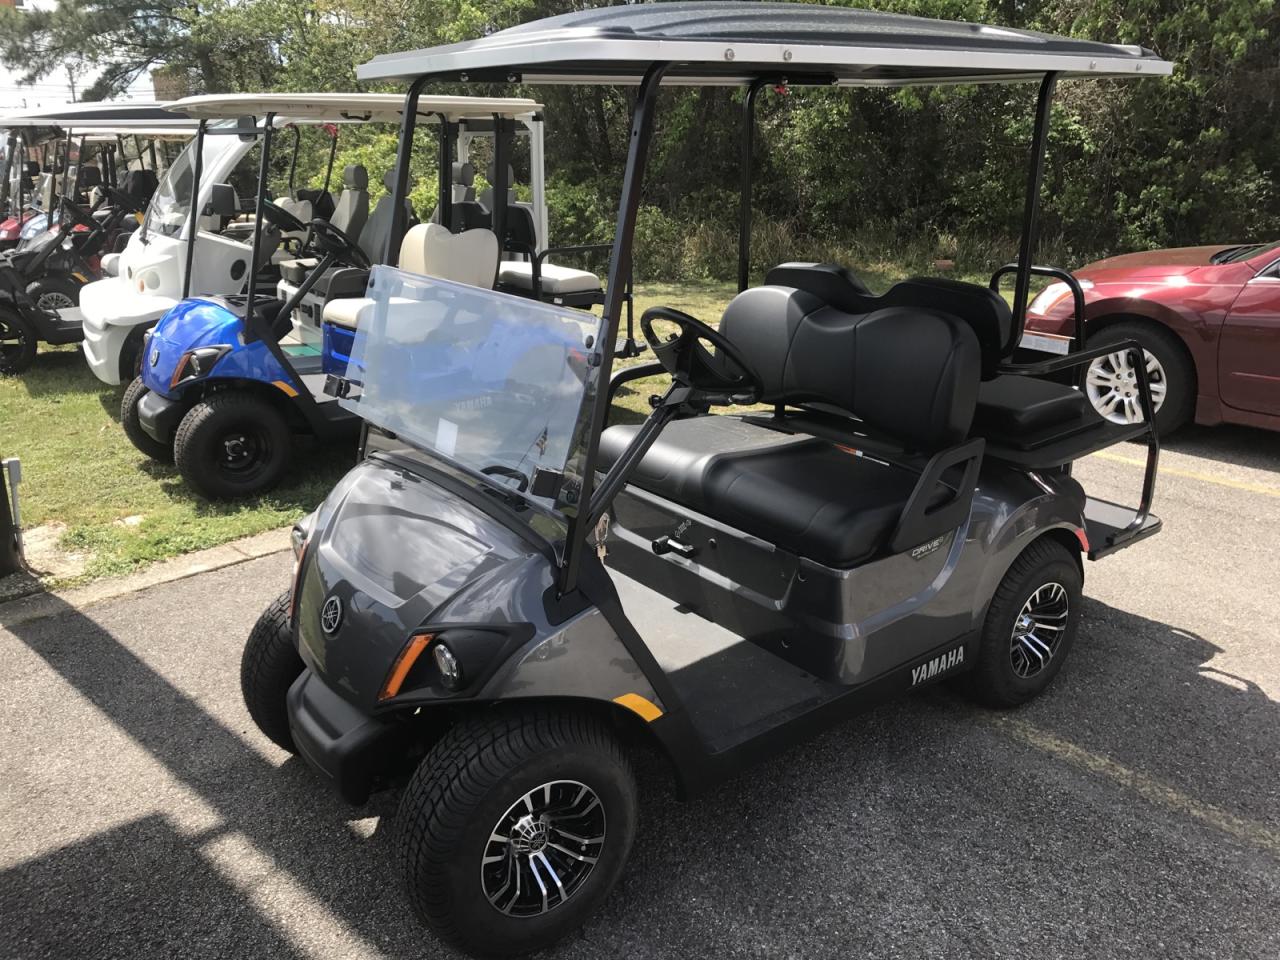 Used Golf Carts for Sale by Owner in Guaynabo, Puerto Rico: A Comprehensive Guide